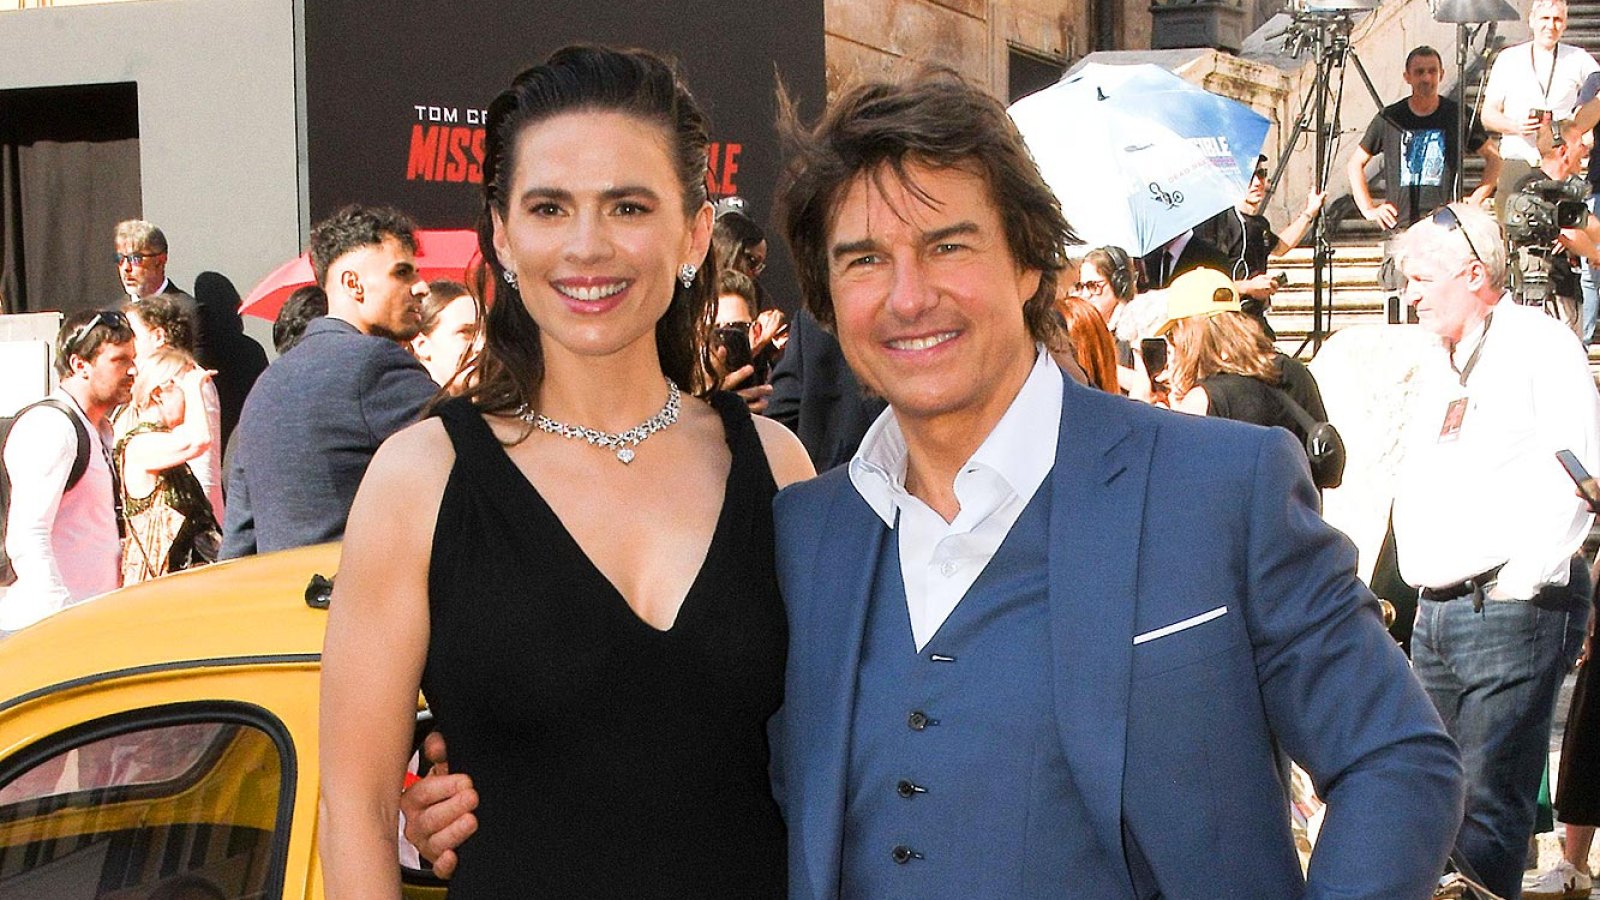 Hayley Atwell Reacts to Tom Cruise Dating Rumors